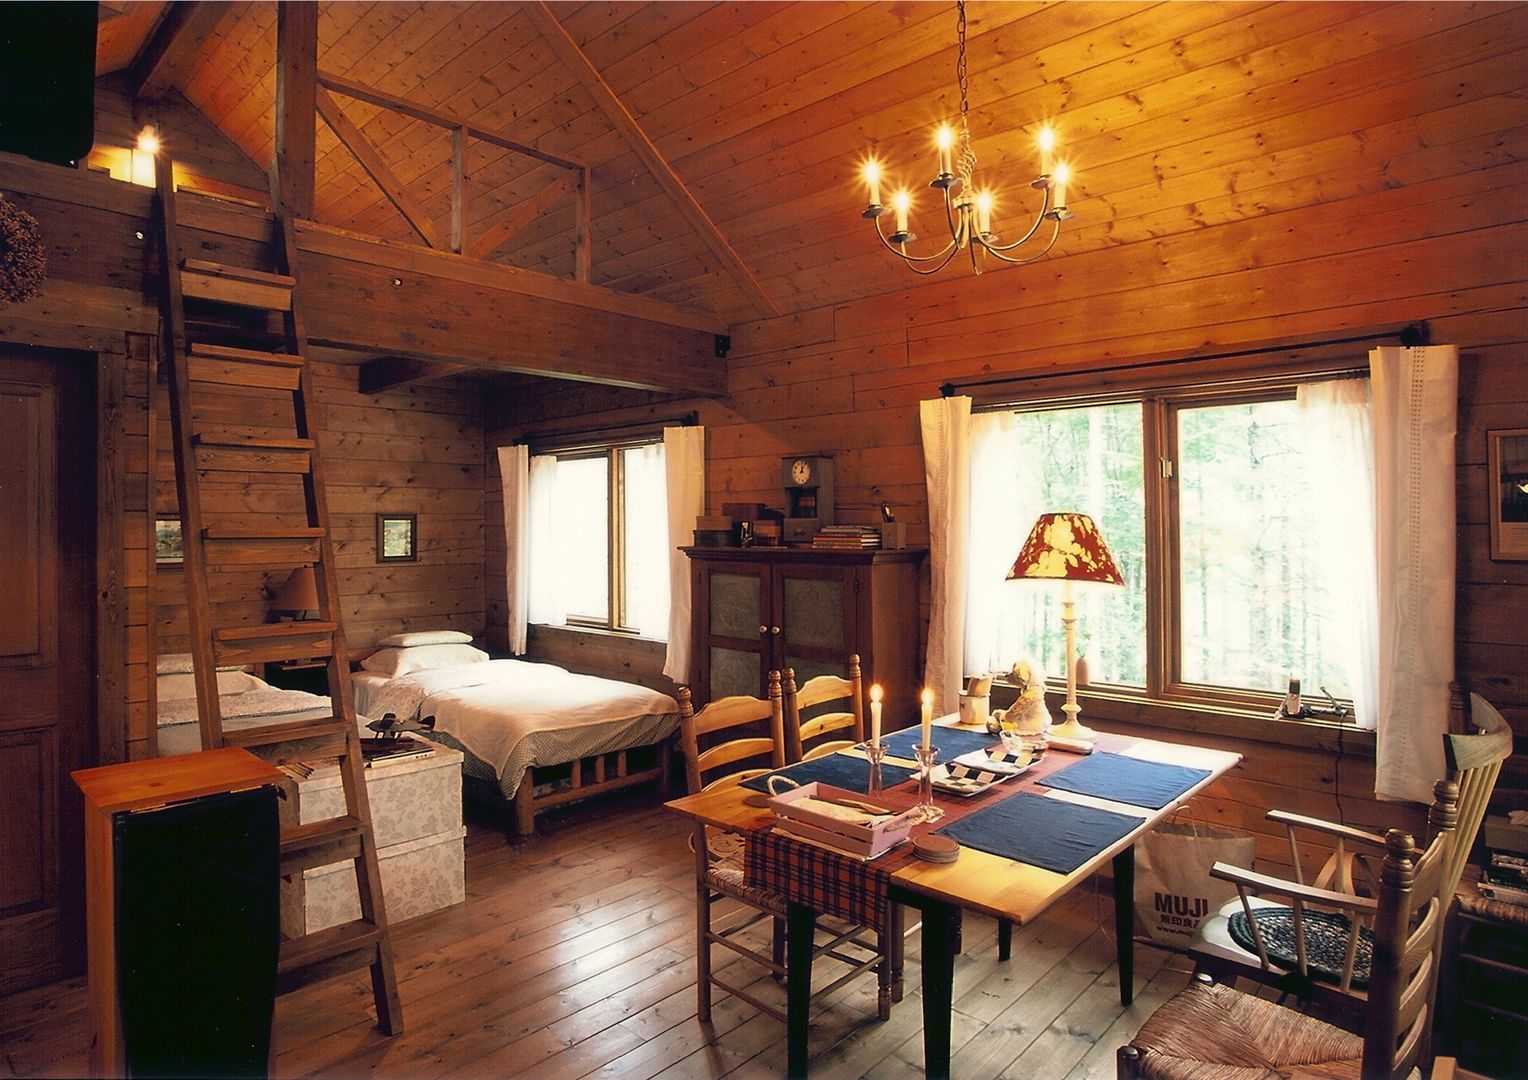 Small Cottage at Mt.Yatsugatake, Japan, Cottage Style / コテージスタイル Cottage Style / コテージスタイル Хол